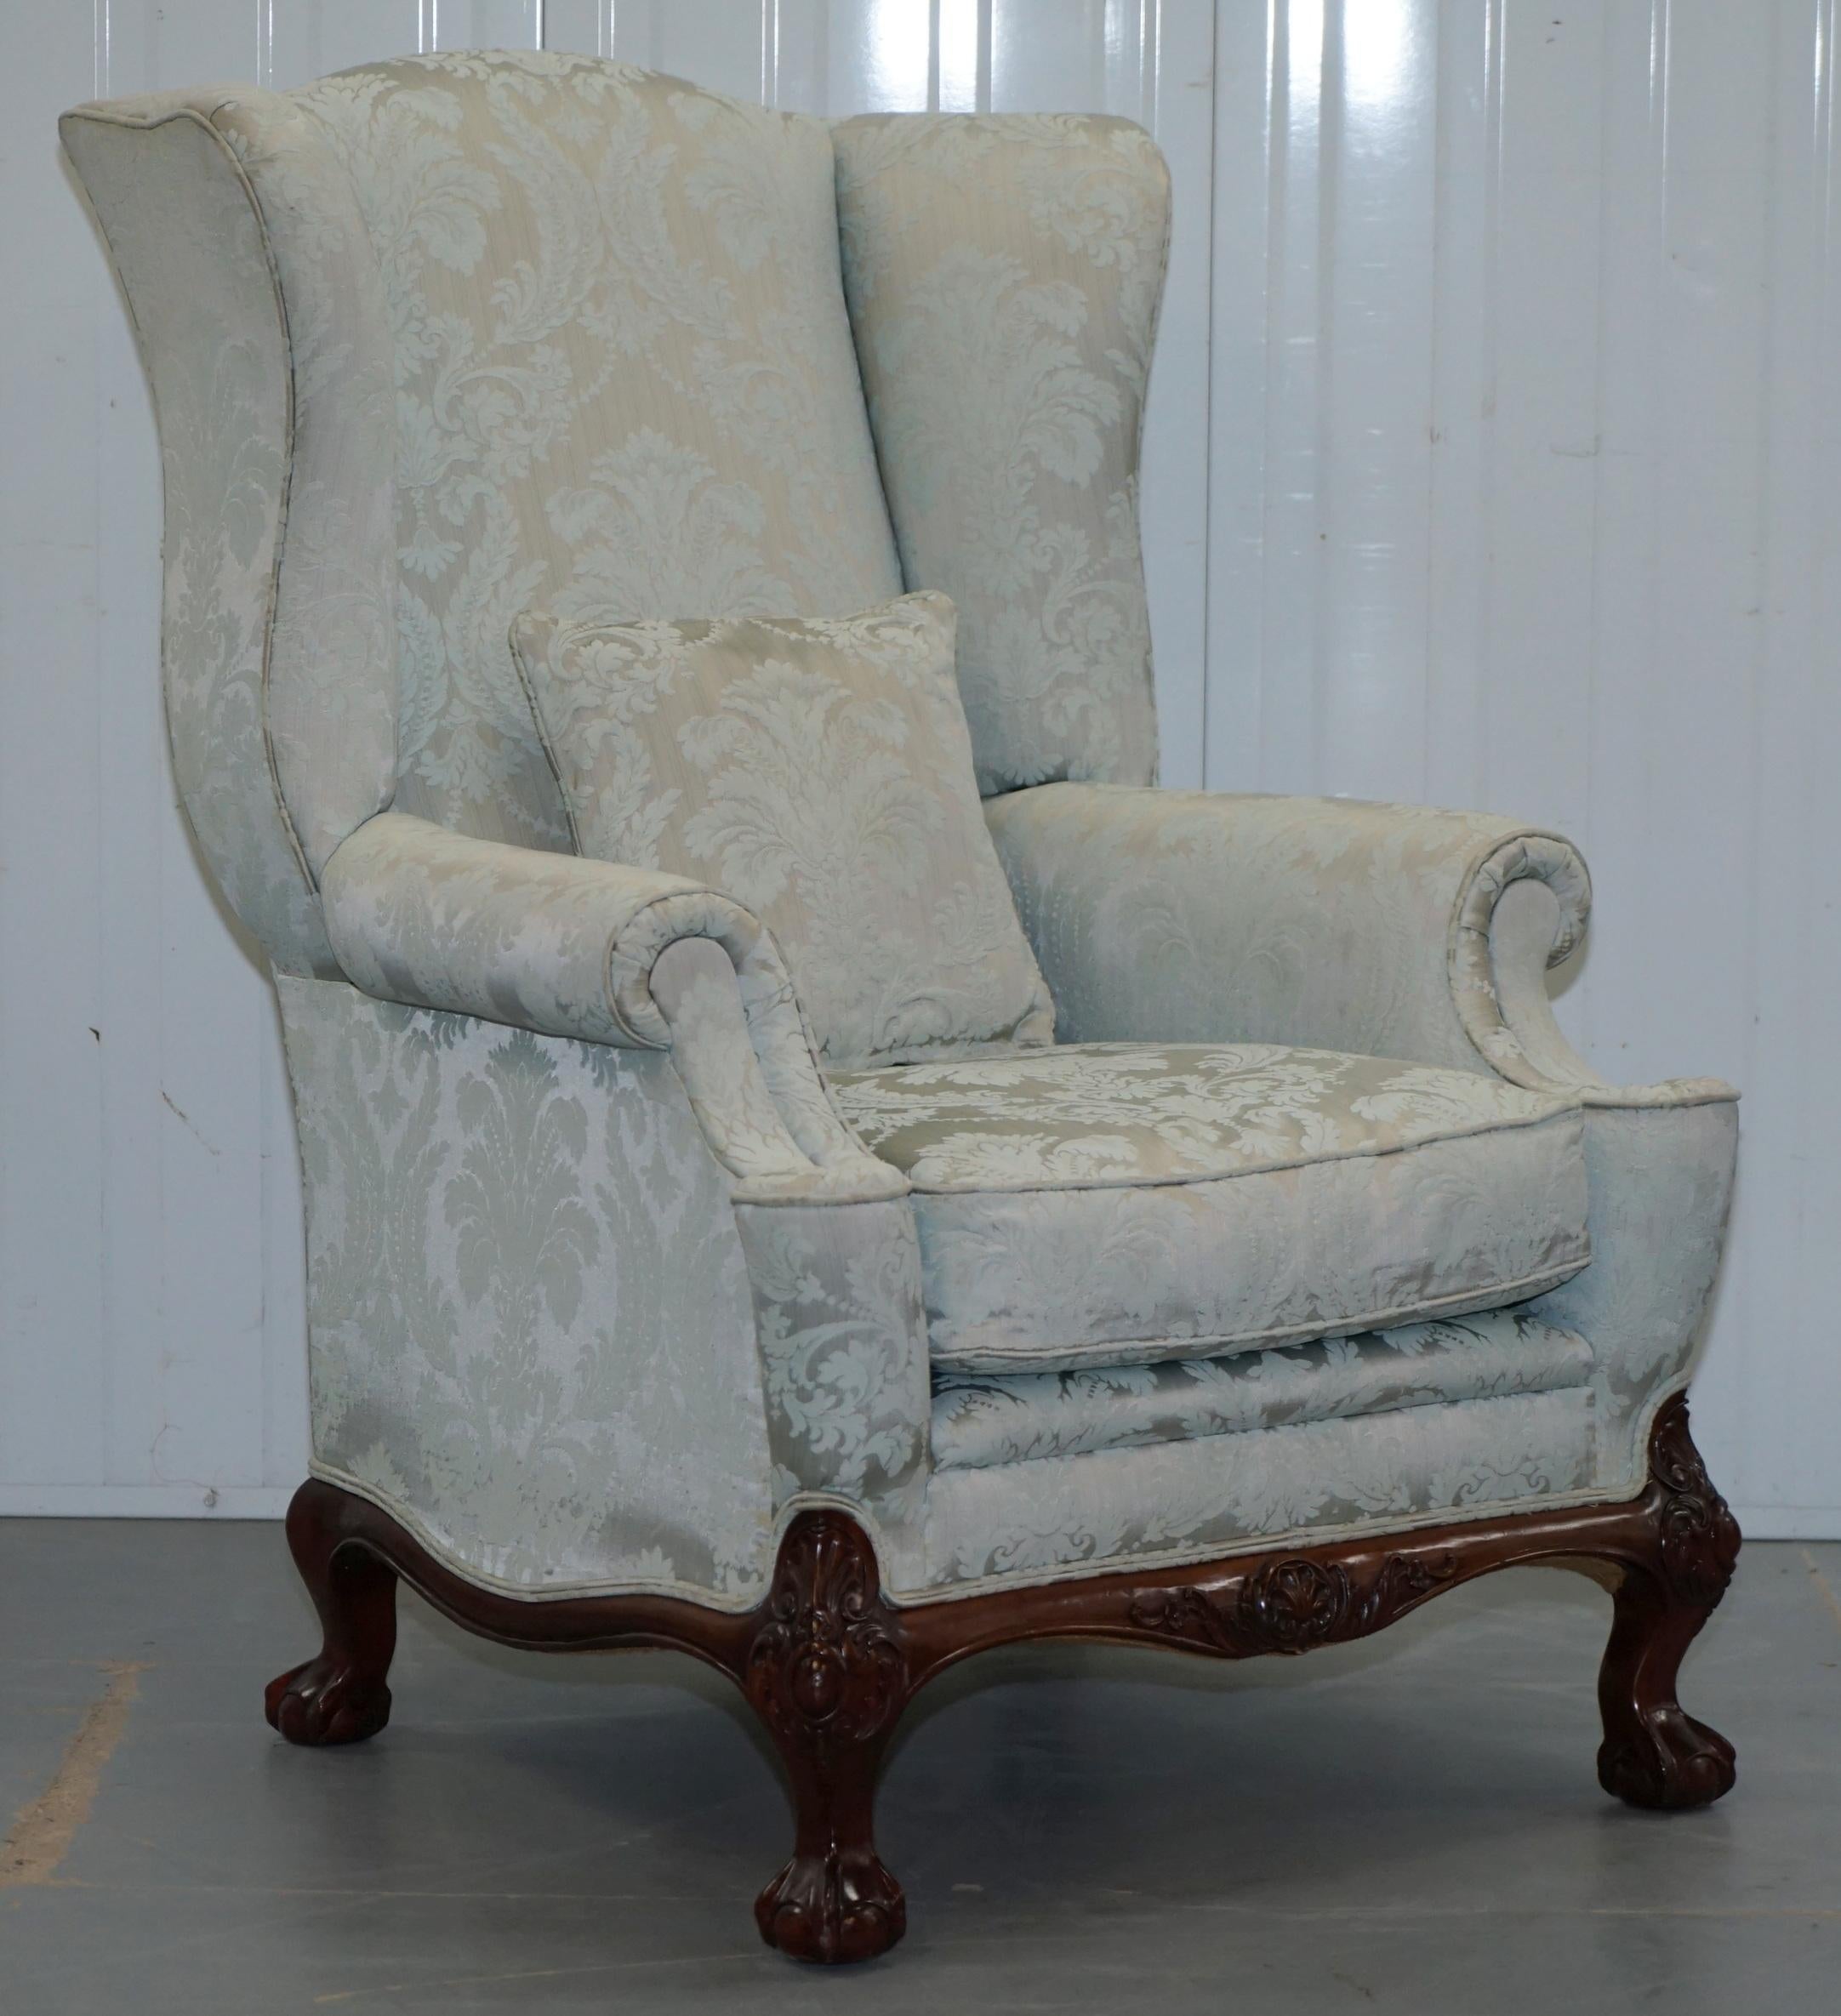 Lovely Brights of Nettlebed Three Piece Sofa & Armchair Suite Damask Upholstery 4